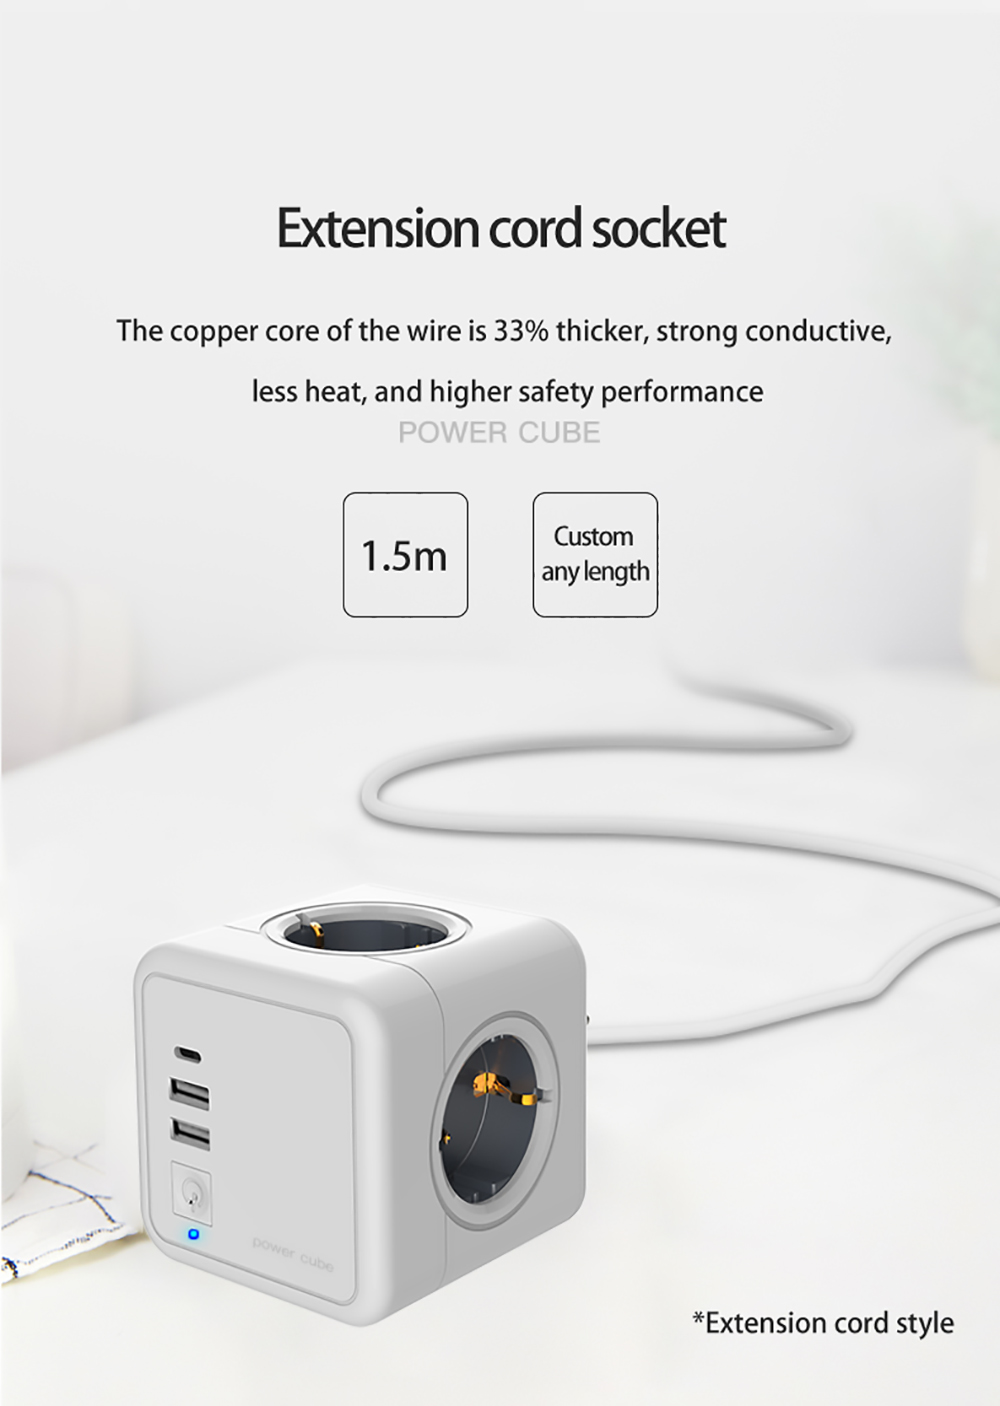 Sopend E04A Multifunctional Powercube Power Strip Socket, EU Plug, 1.5m Extension Cord, 4 Outlets, 2 USB-A Ports - Grey and White